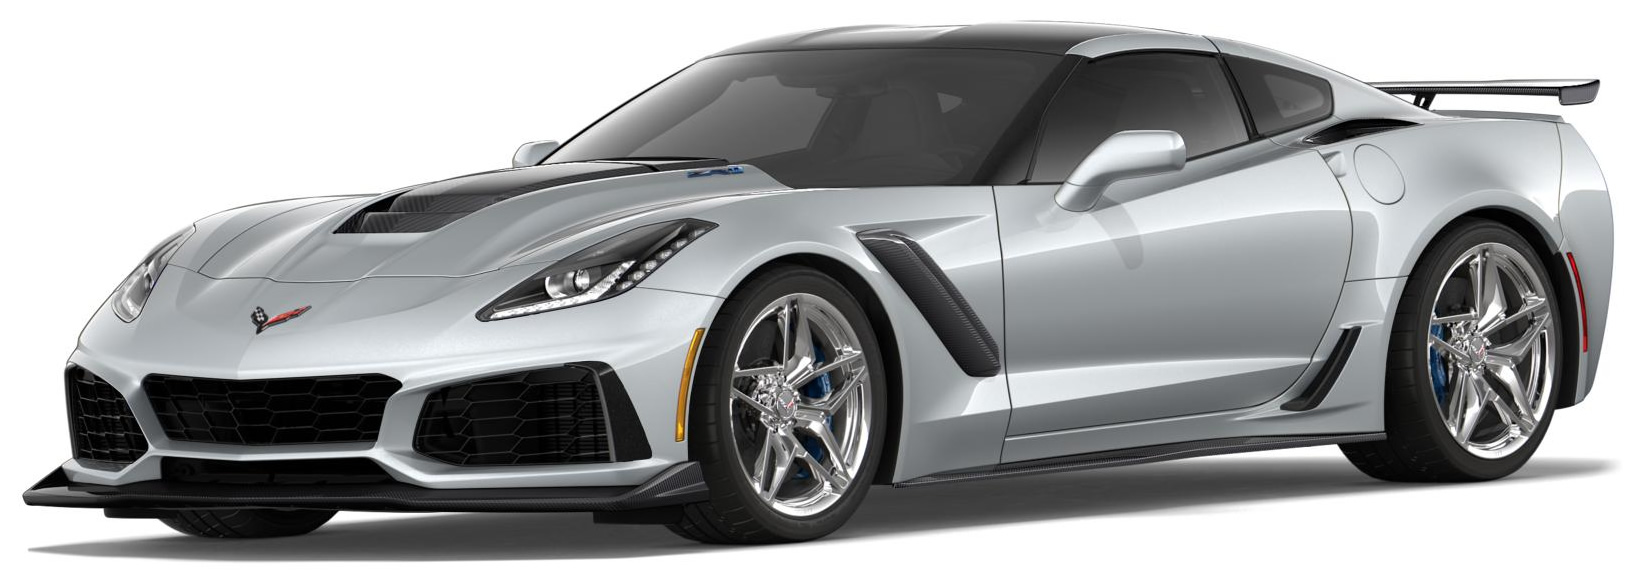 2019 Corvette ZR1 Coupe in Blade Silver Metallic with Chrome Wheels